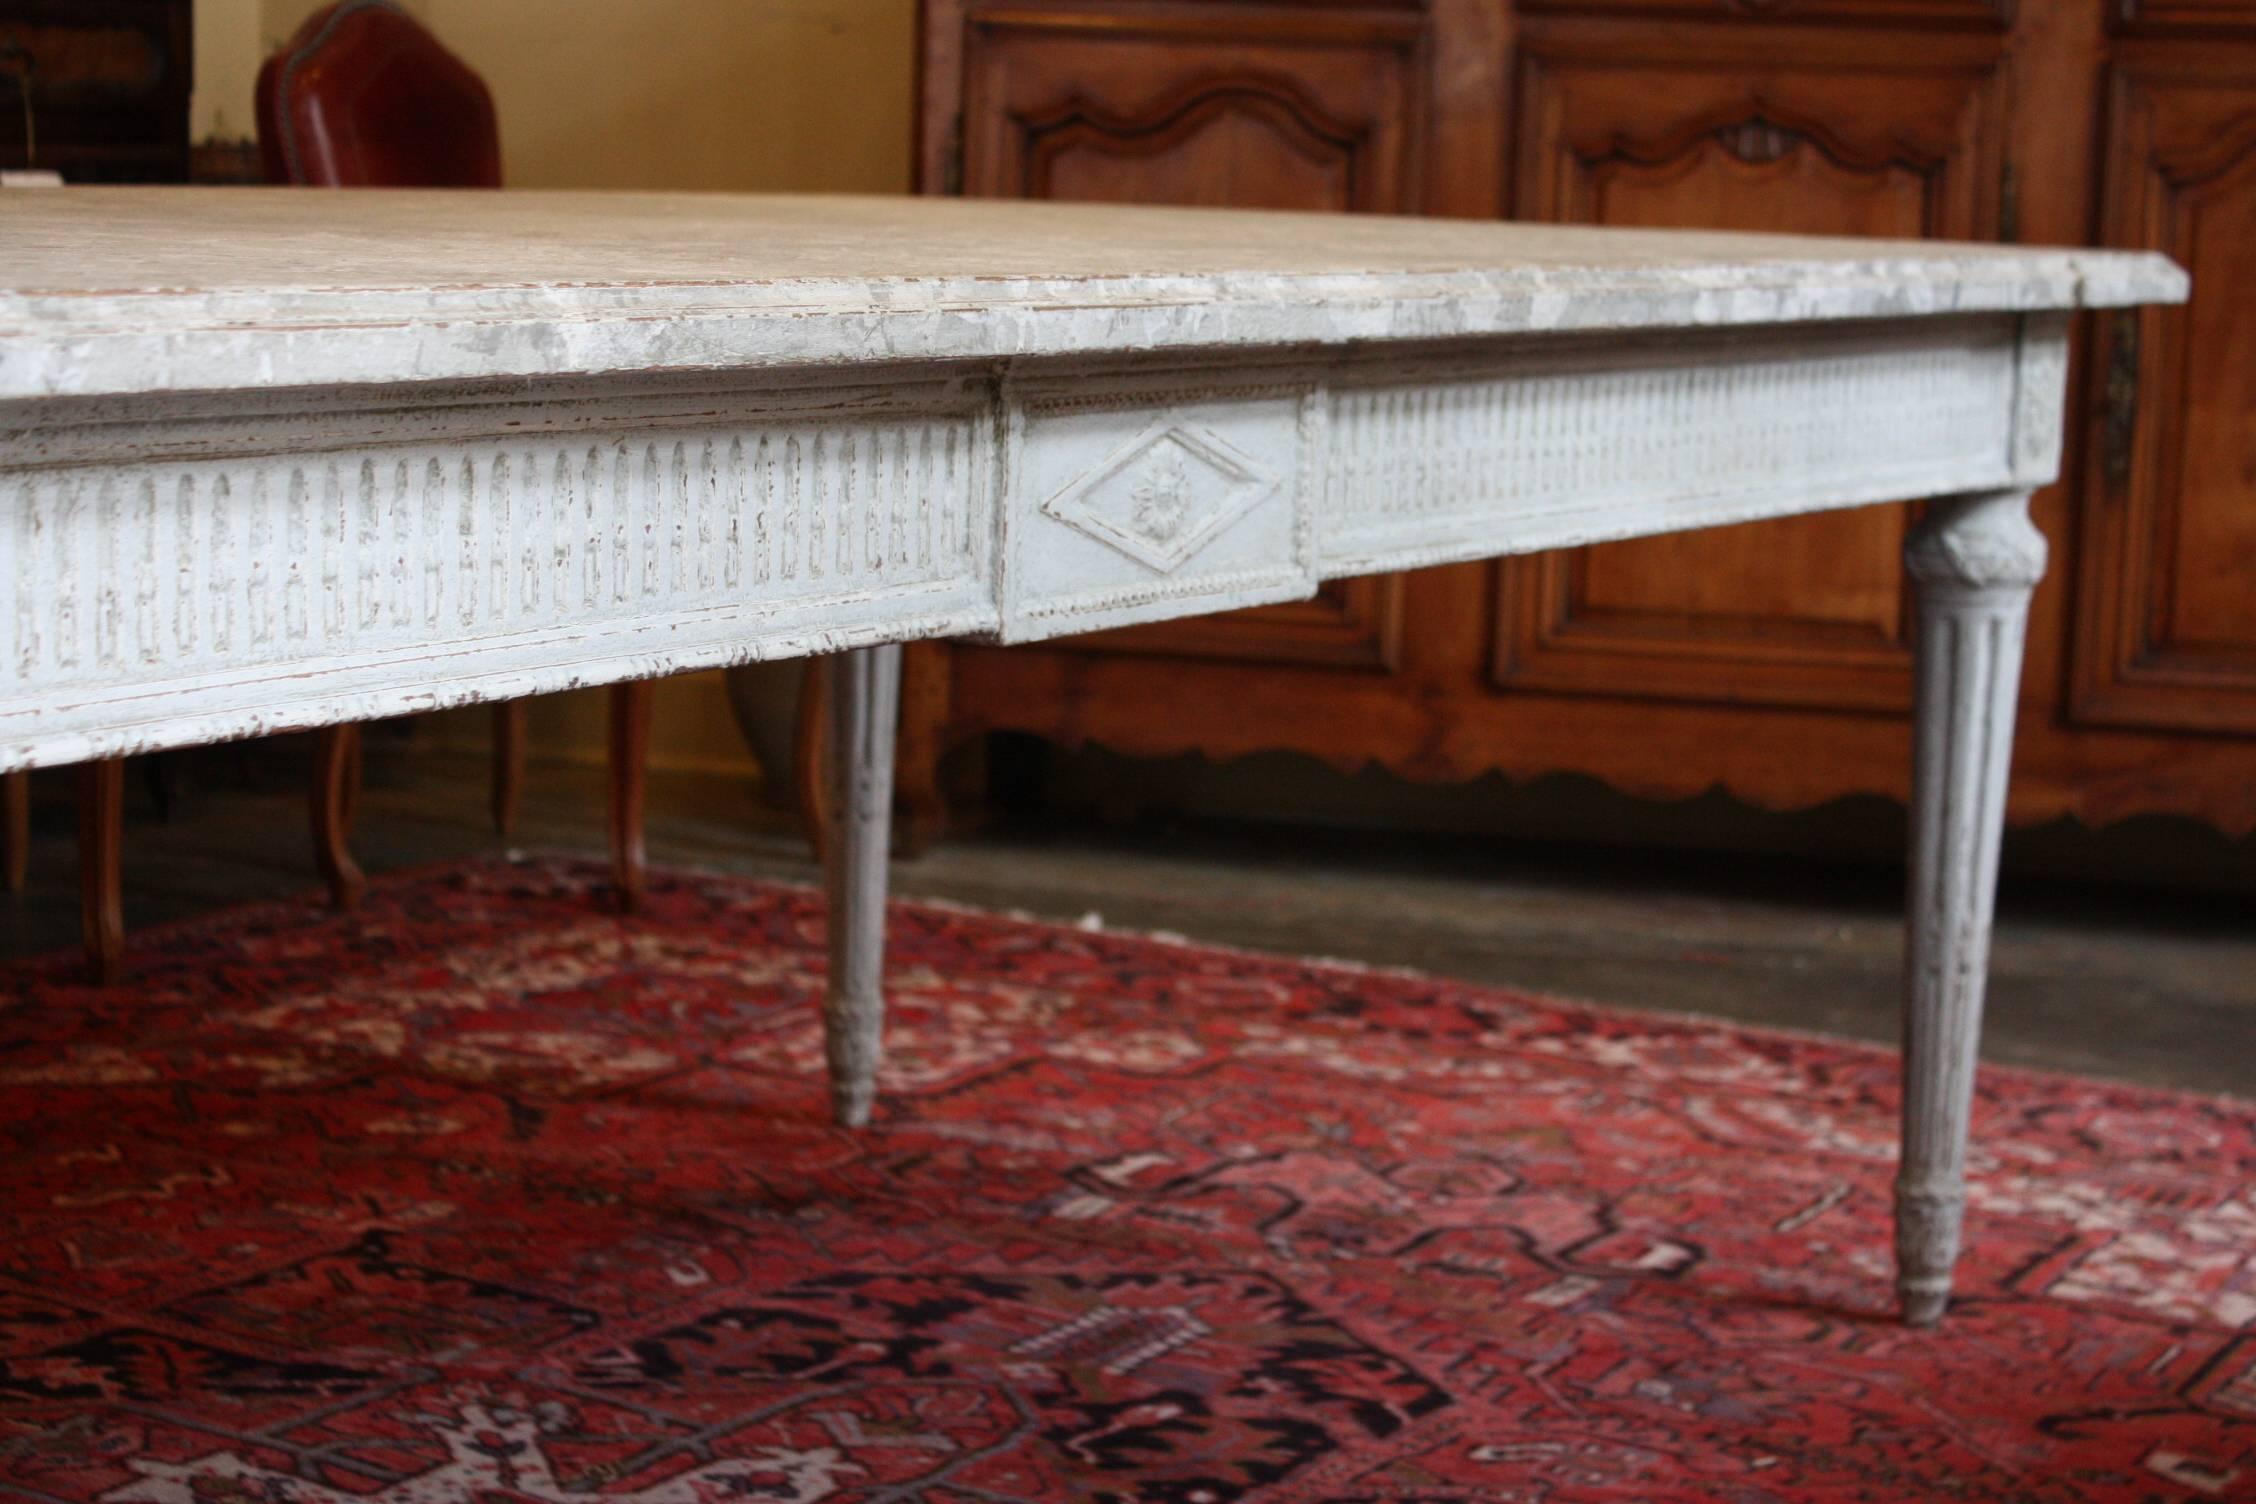 This is an exceptional antique Louis XVI painted dining room table crafted in northern France, circa 1860. The table has a faux marble top, a carved apron, tapered legs. The top is painted in a neutral gray palette with a faux marble design. This